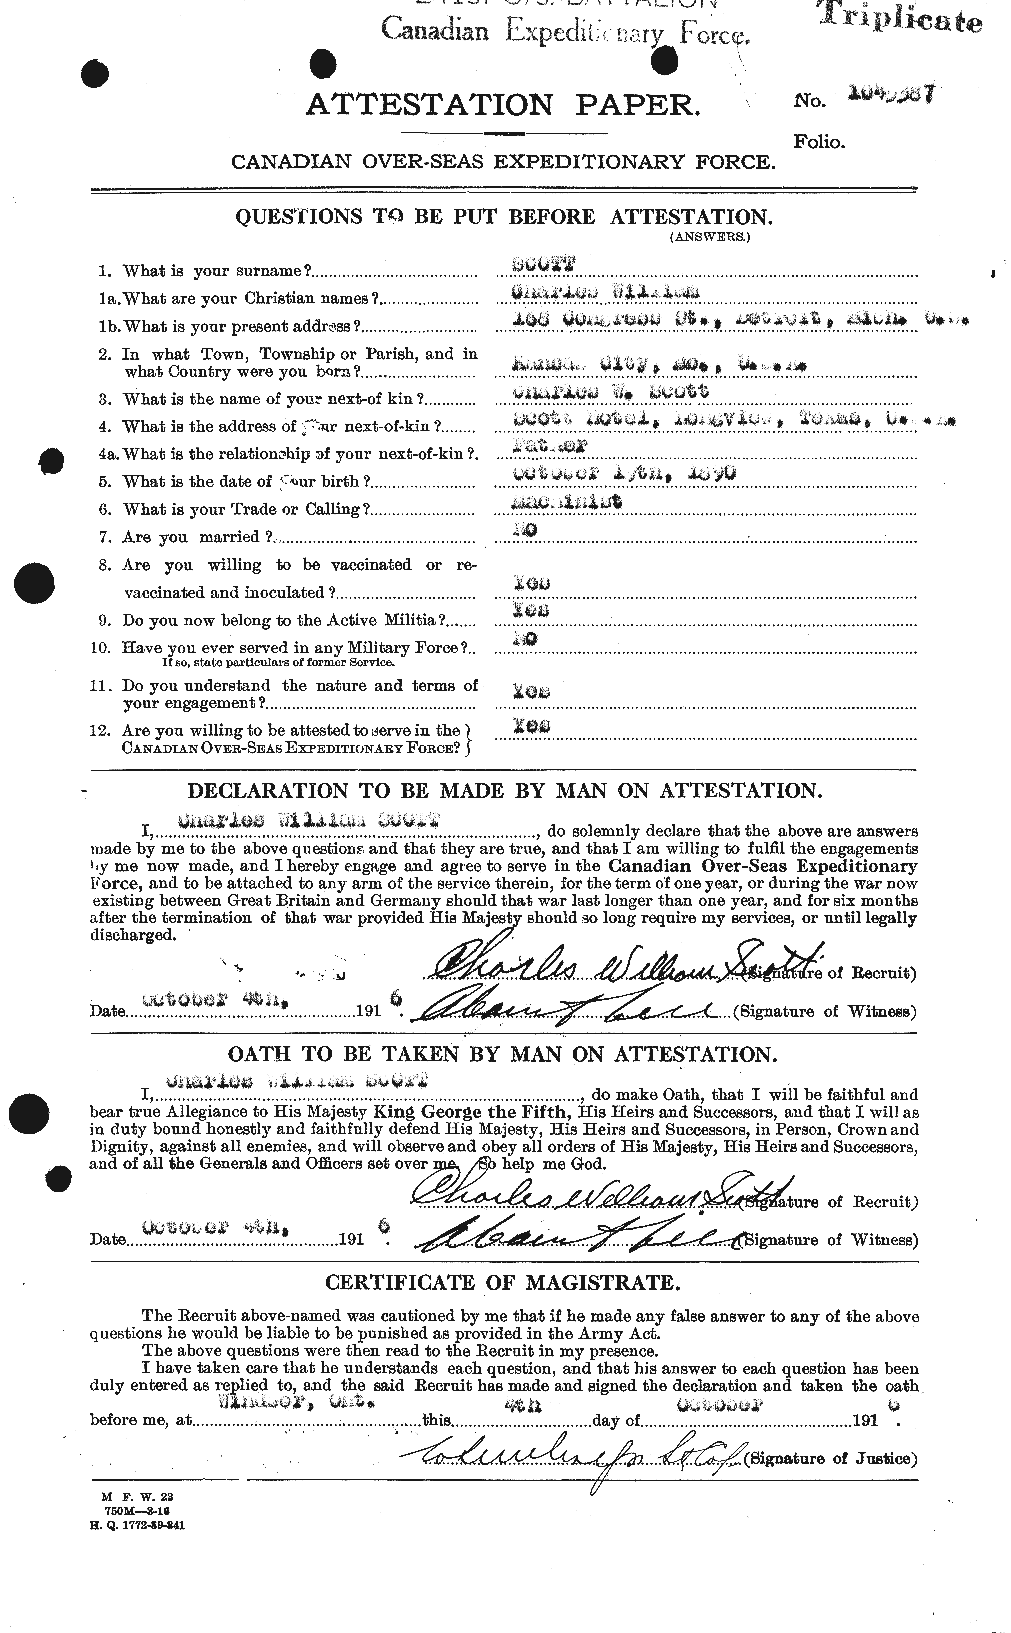 Personnel Records of the First World War - CEF 085870a